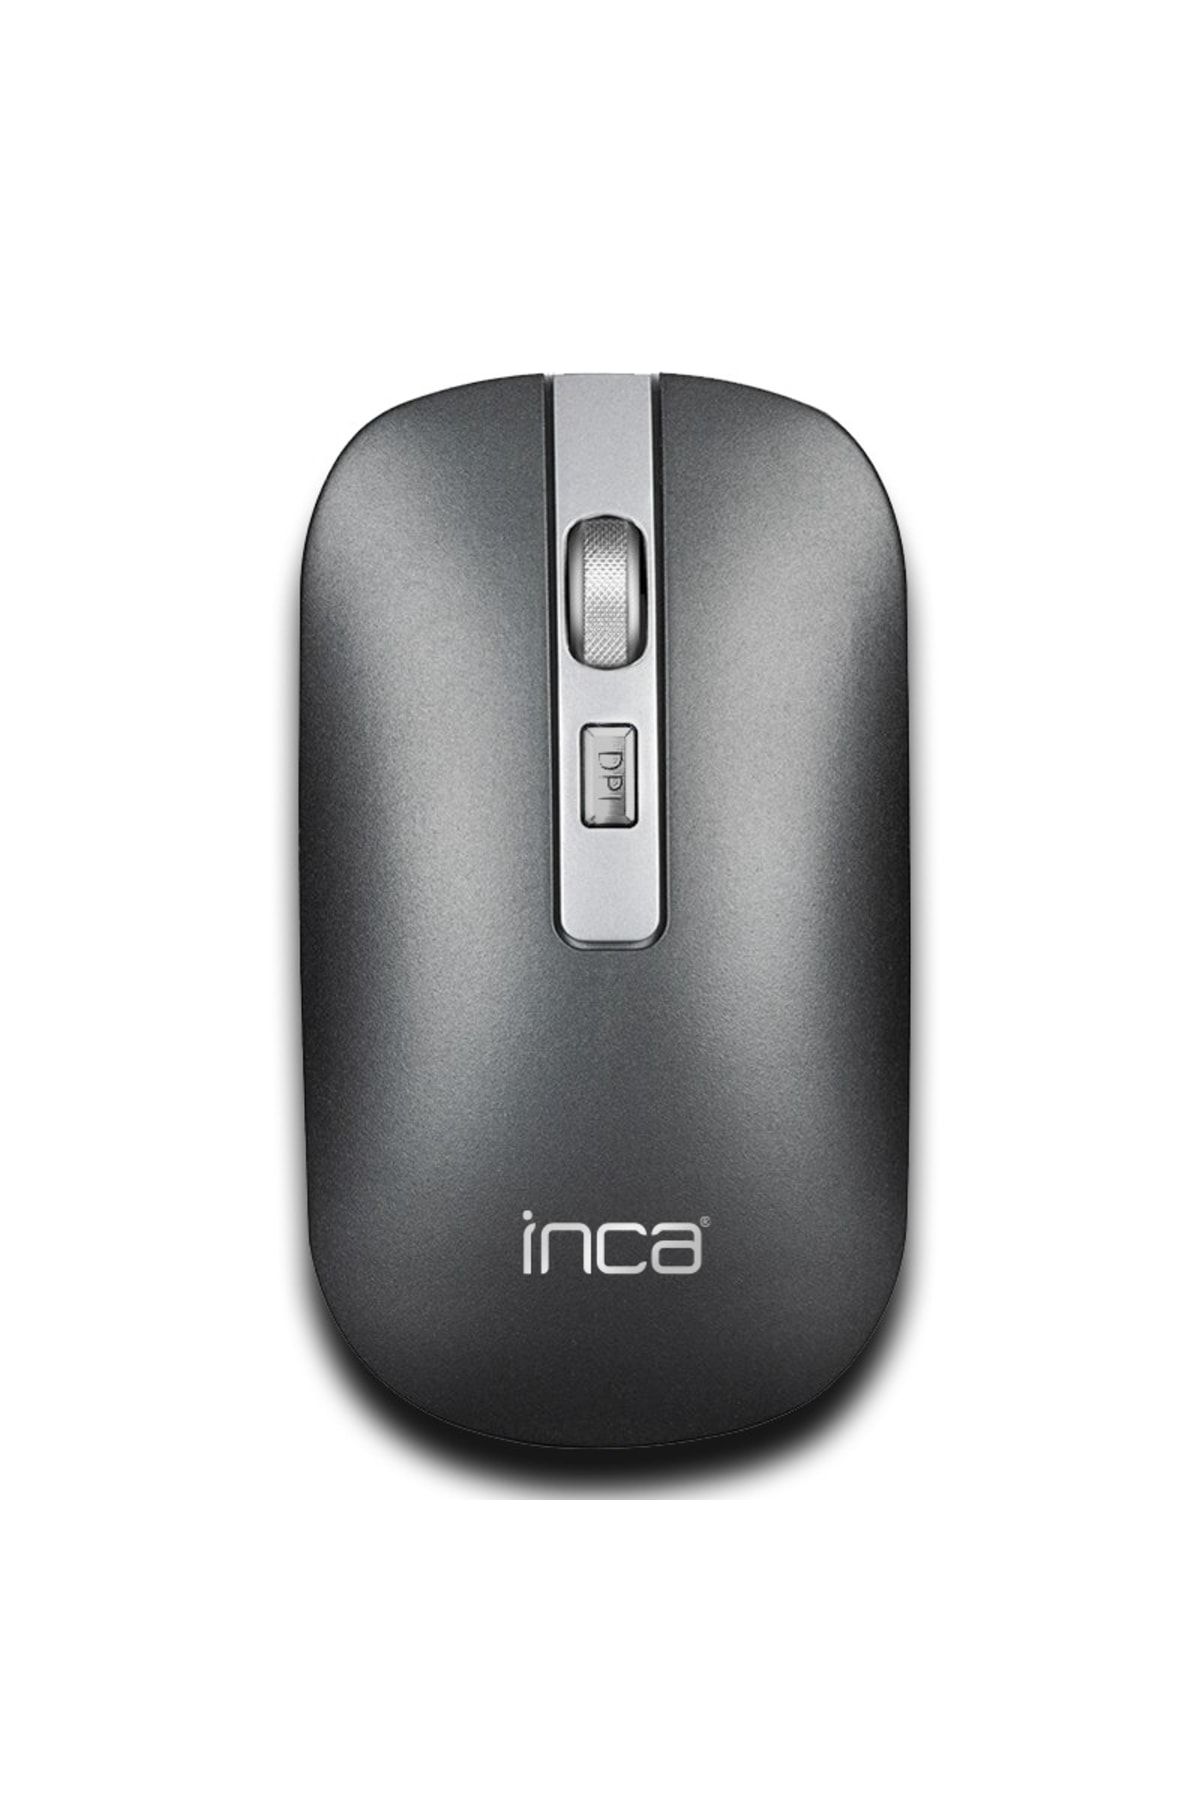 Inca Iwm-531rg Bluetooth Wireless Rechargeable Special Metallic Silent Mouse